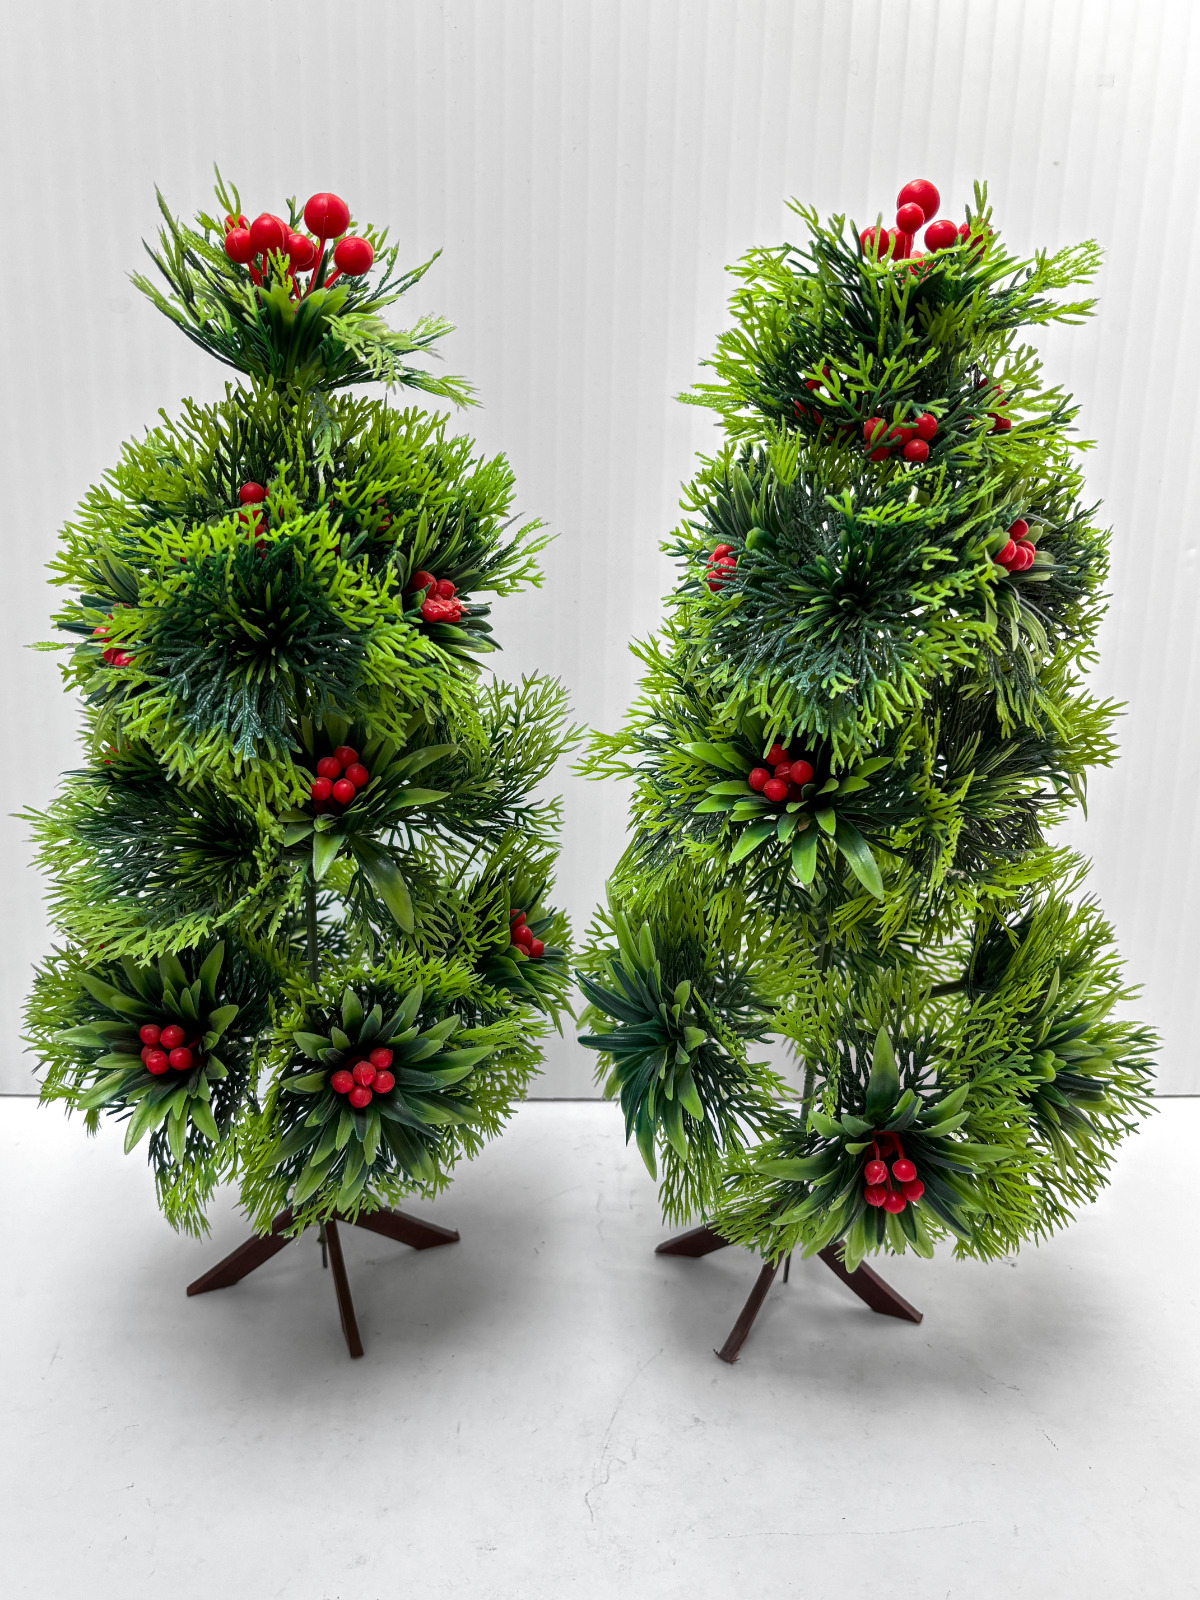 VINTAGE Set of 2 Vintage Plastic Tabletop Christmas Trees - Holly 15 inches tall